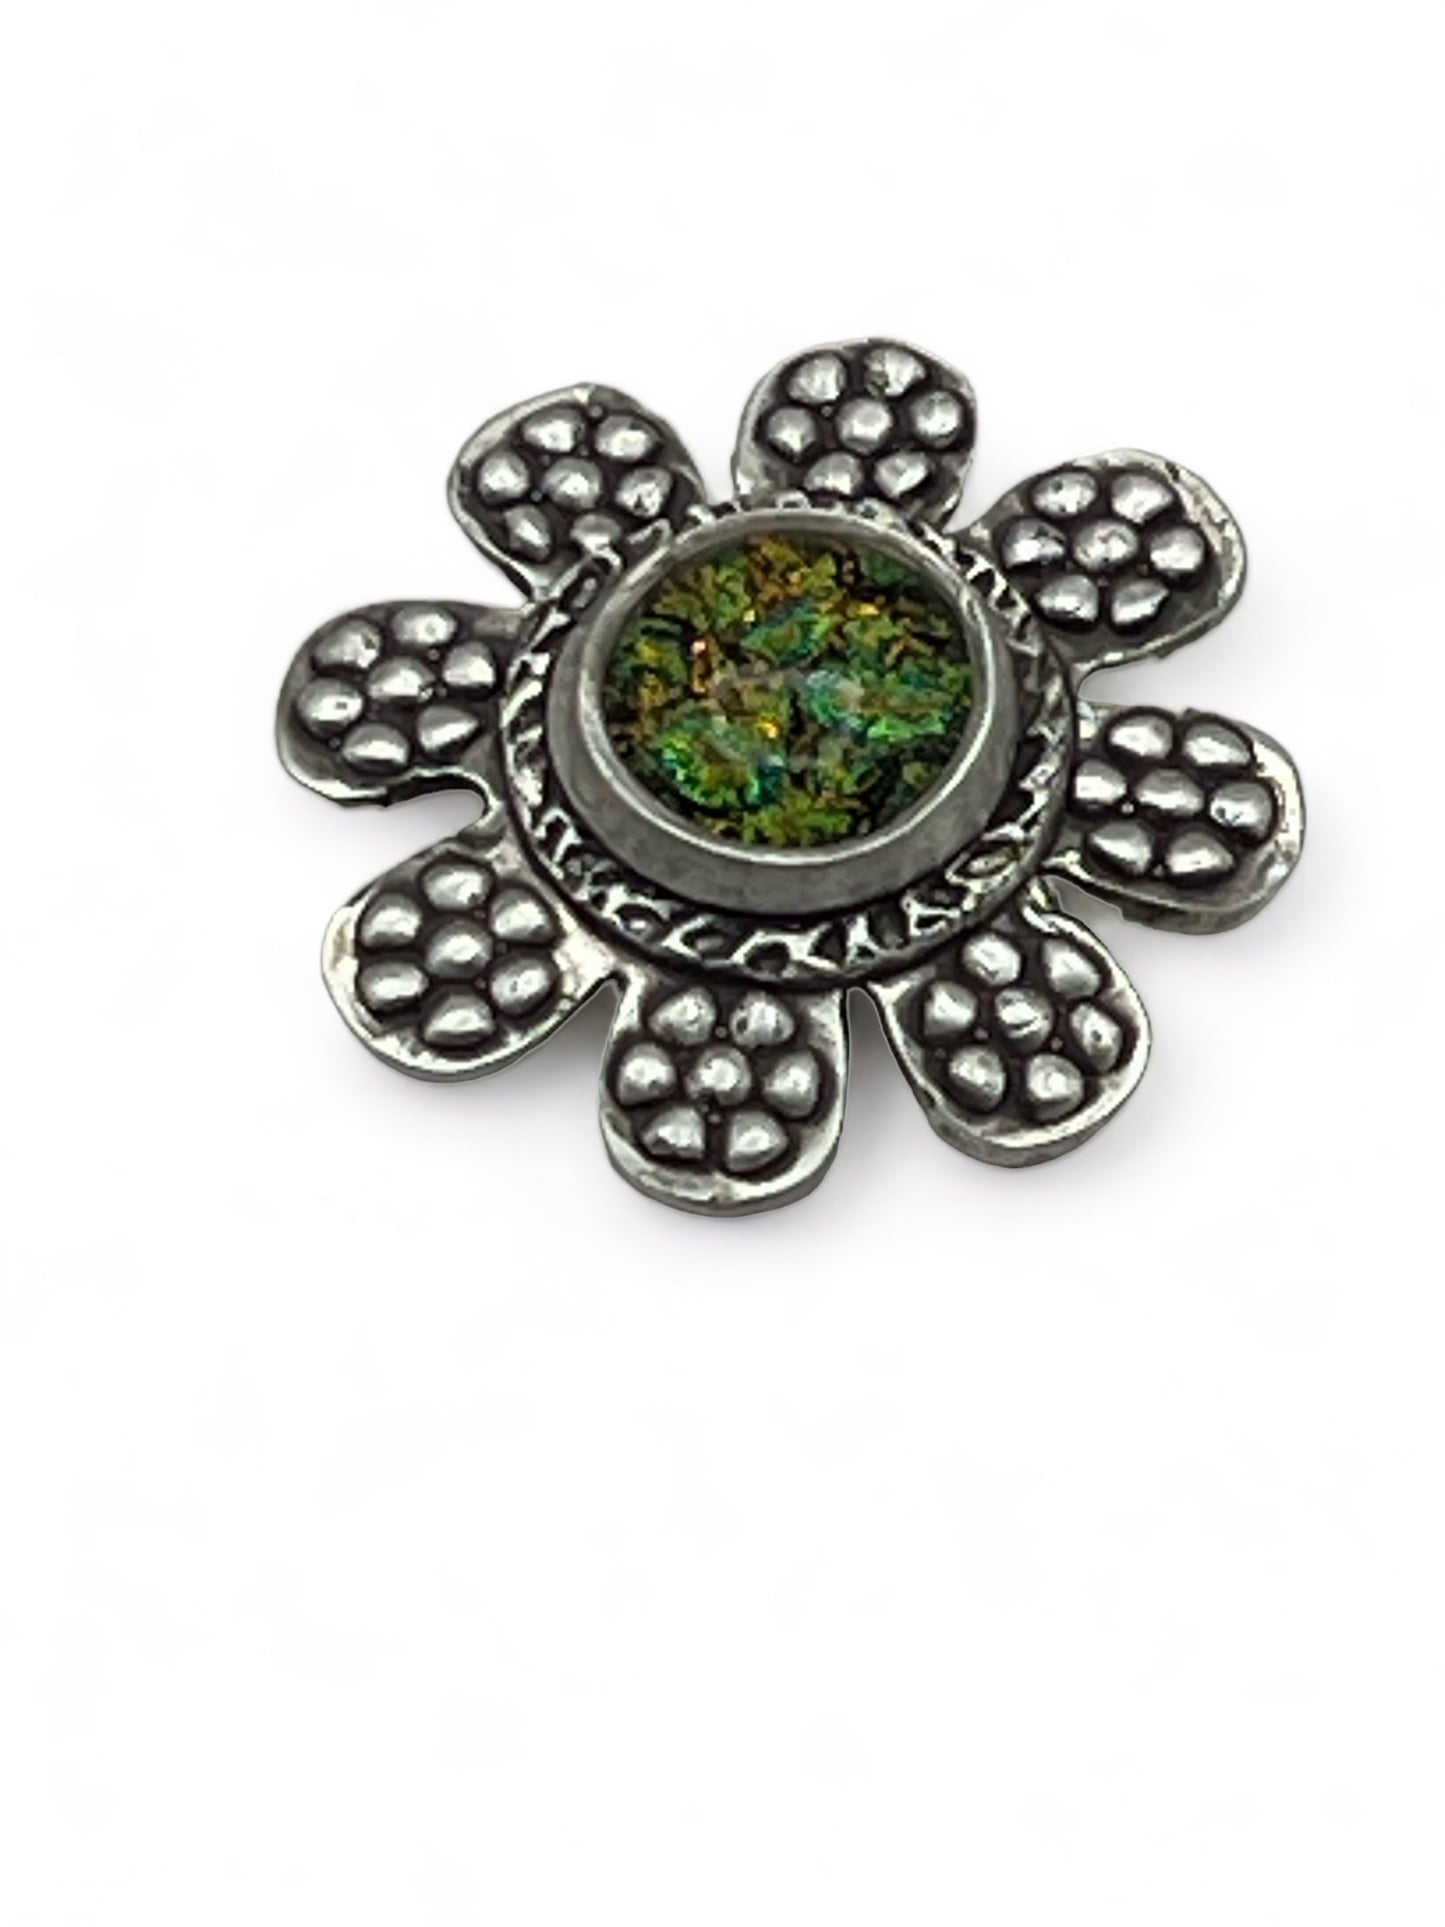 Daisy Cut-Out with Large Cabochon Oxidized .999 Fine Silver Pendant